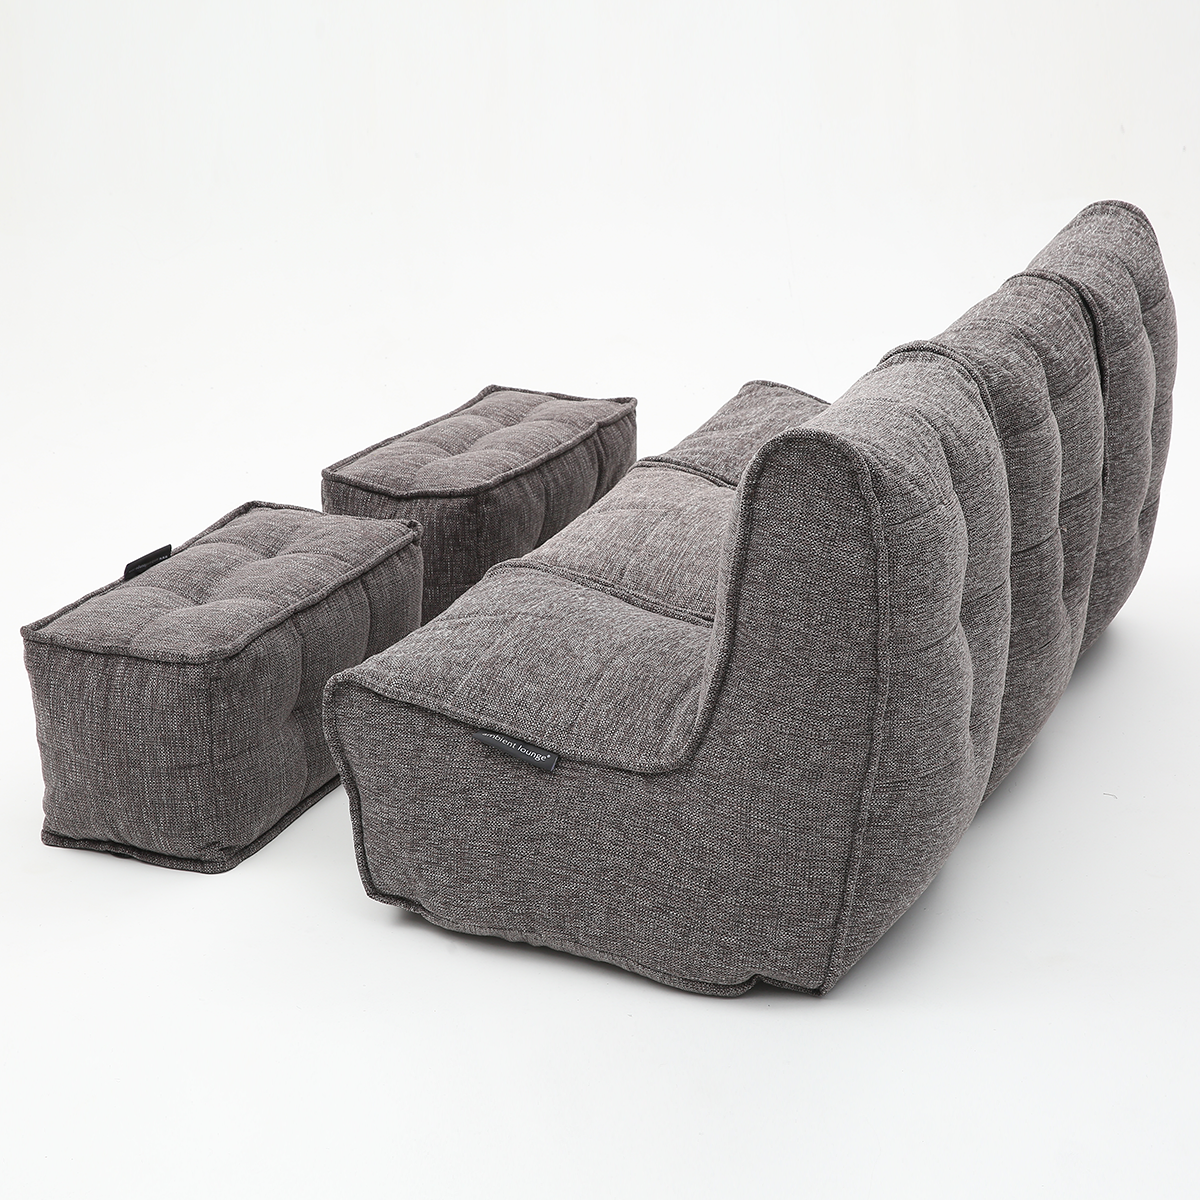 Rear view of MOD 3 Movie Couch and Twin Ottoman in Luscious Grey